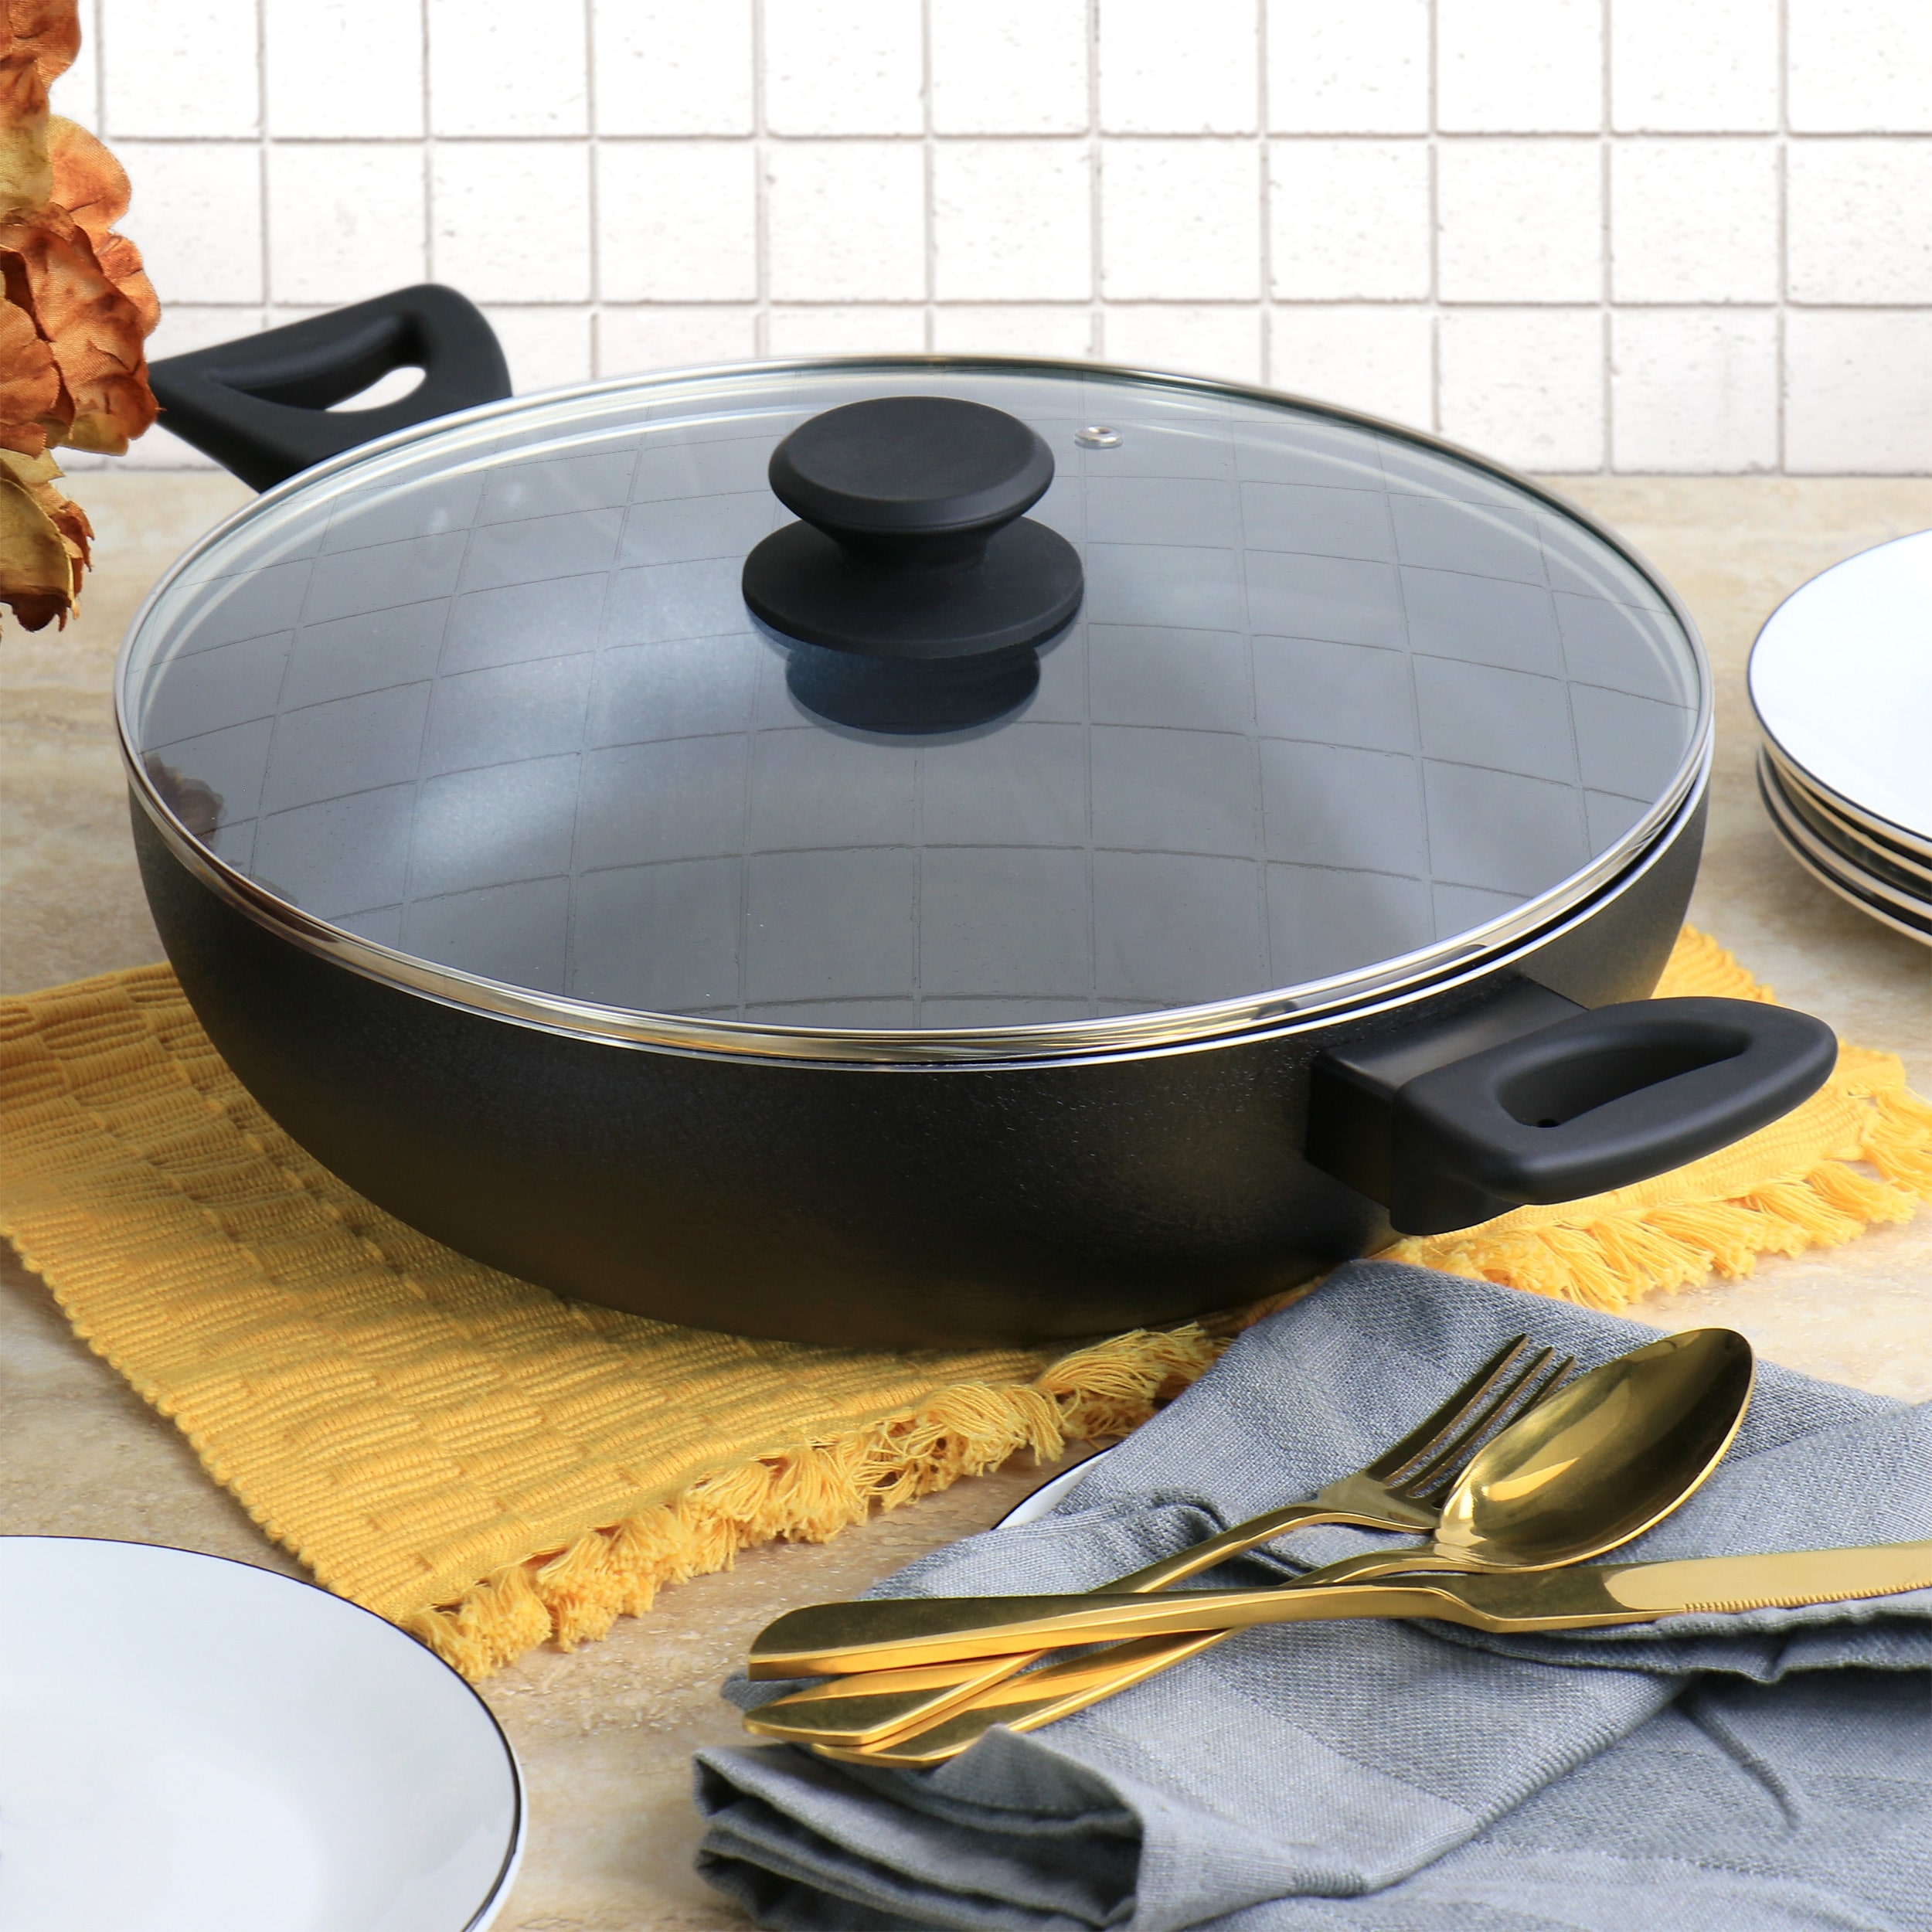 https://ak1.ostkcdn.com/images/products/is/images/direct/f17bdcff85ff996e93c9c5f2cf18d997c254b4a6/5-Quart-Nonstick-Aluminum-Everyday-Pan-in-Black.jpg